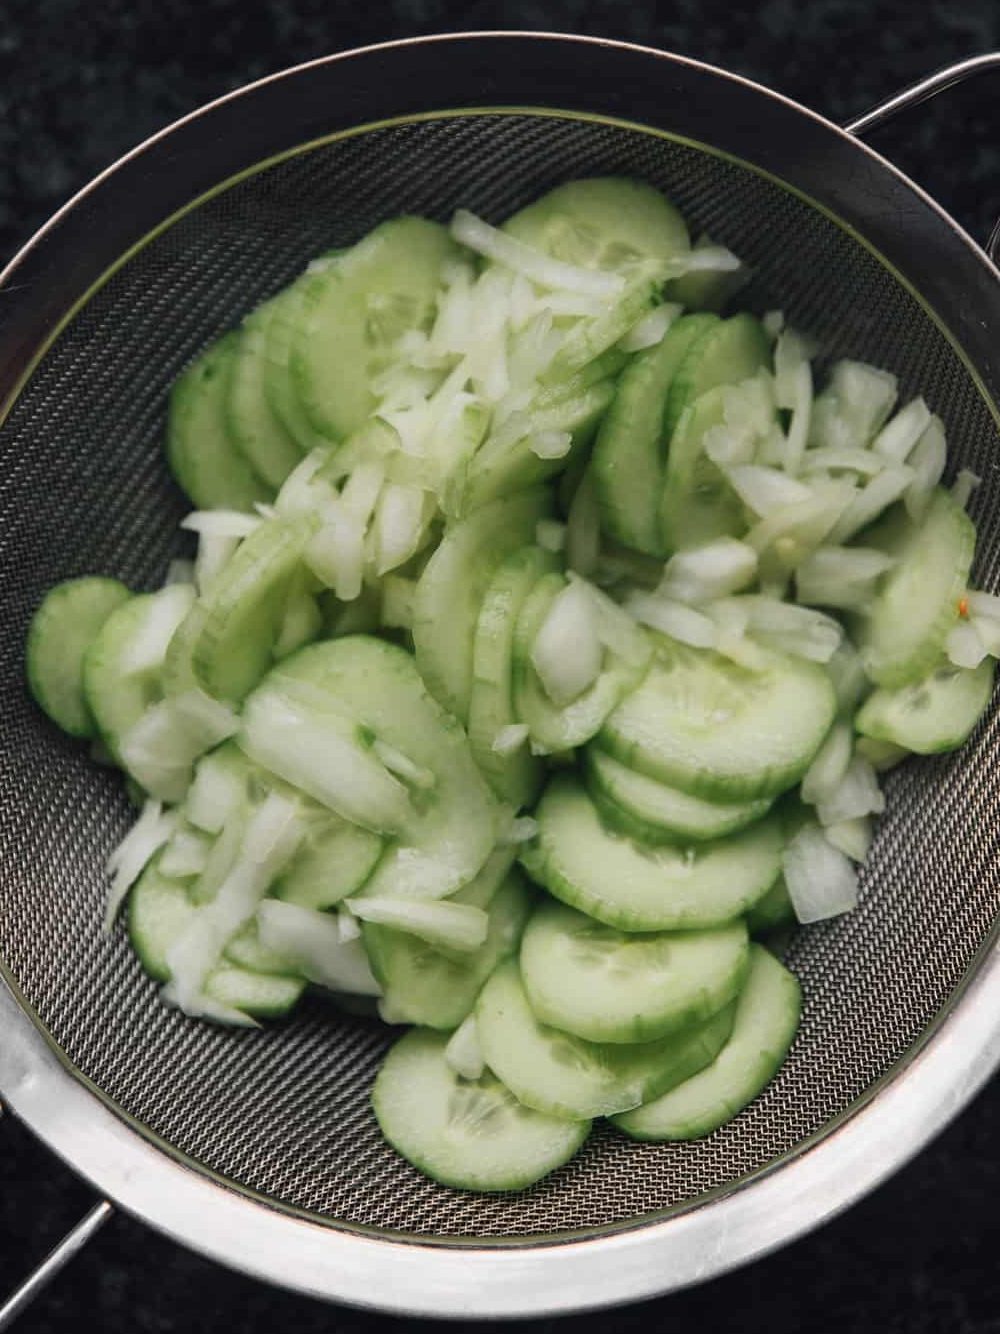 Turn cucumber mixture into a colander set over a bowl or in a sink; let drain, stirring occasionally, until most of the liquid has drained, about 30 minutes more. Transfer the drained cucumber mixture to a large bowl.